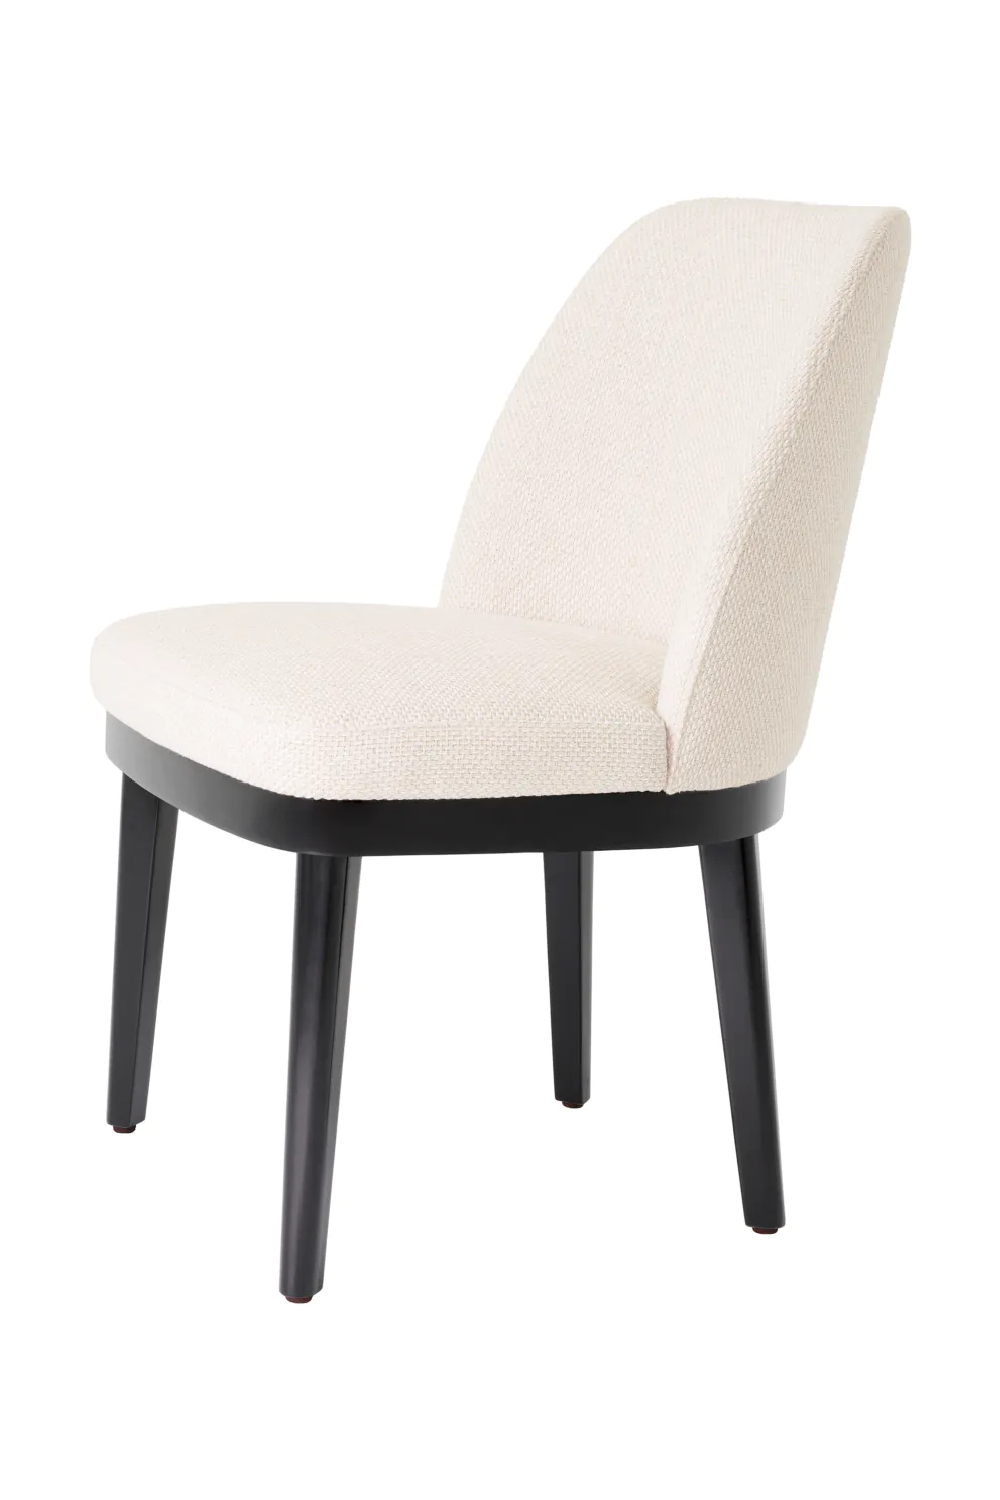 Minimalist Upholstered Dining Chair | Eichholtz Costa | Oroa.com